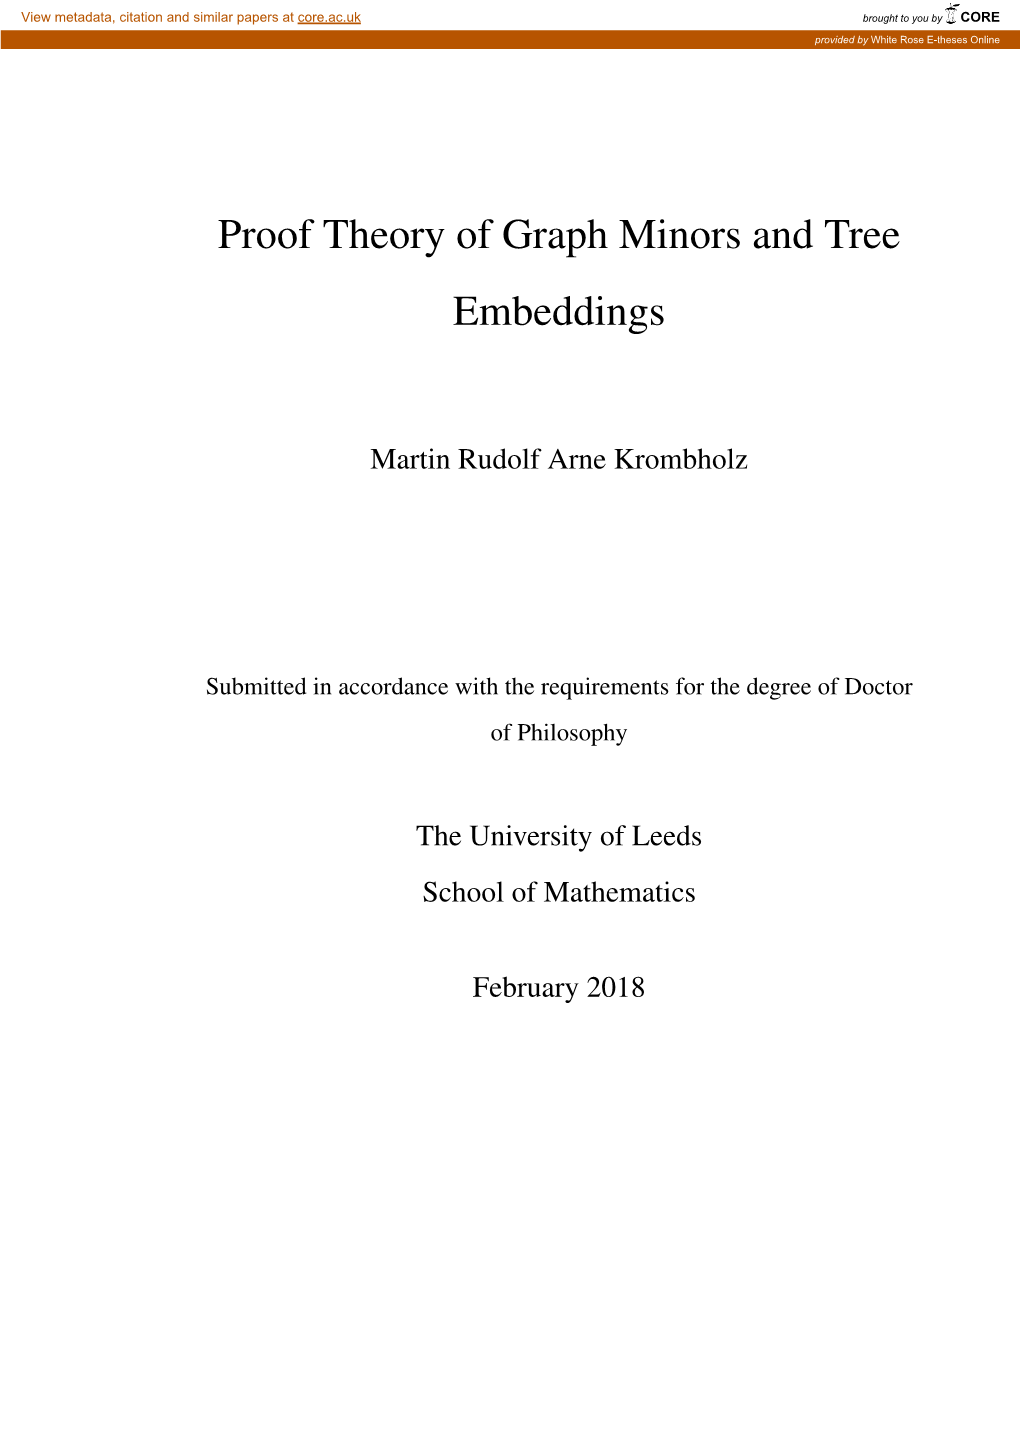 Proof Theory of Graph Minors and Tree Embeddings